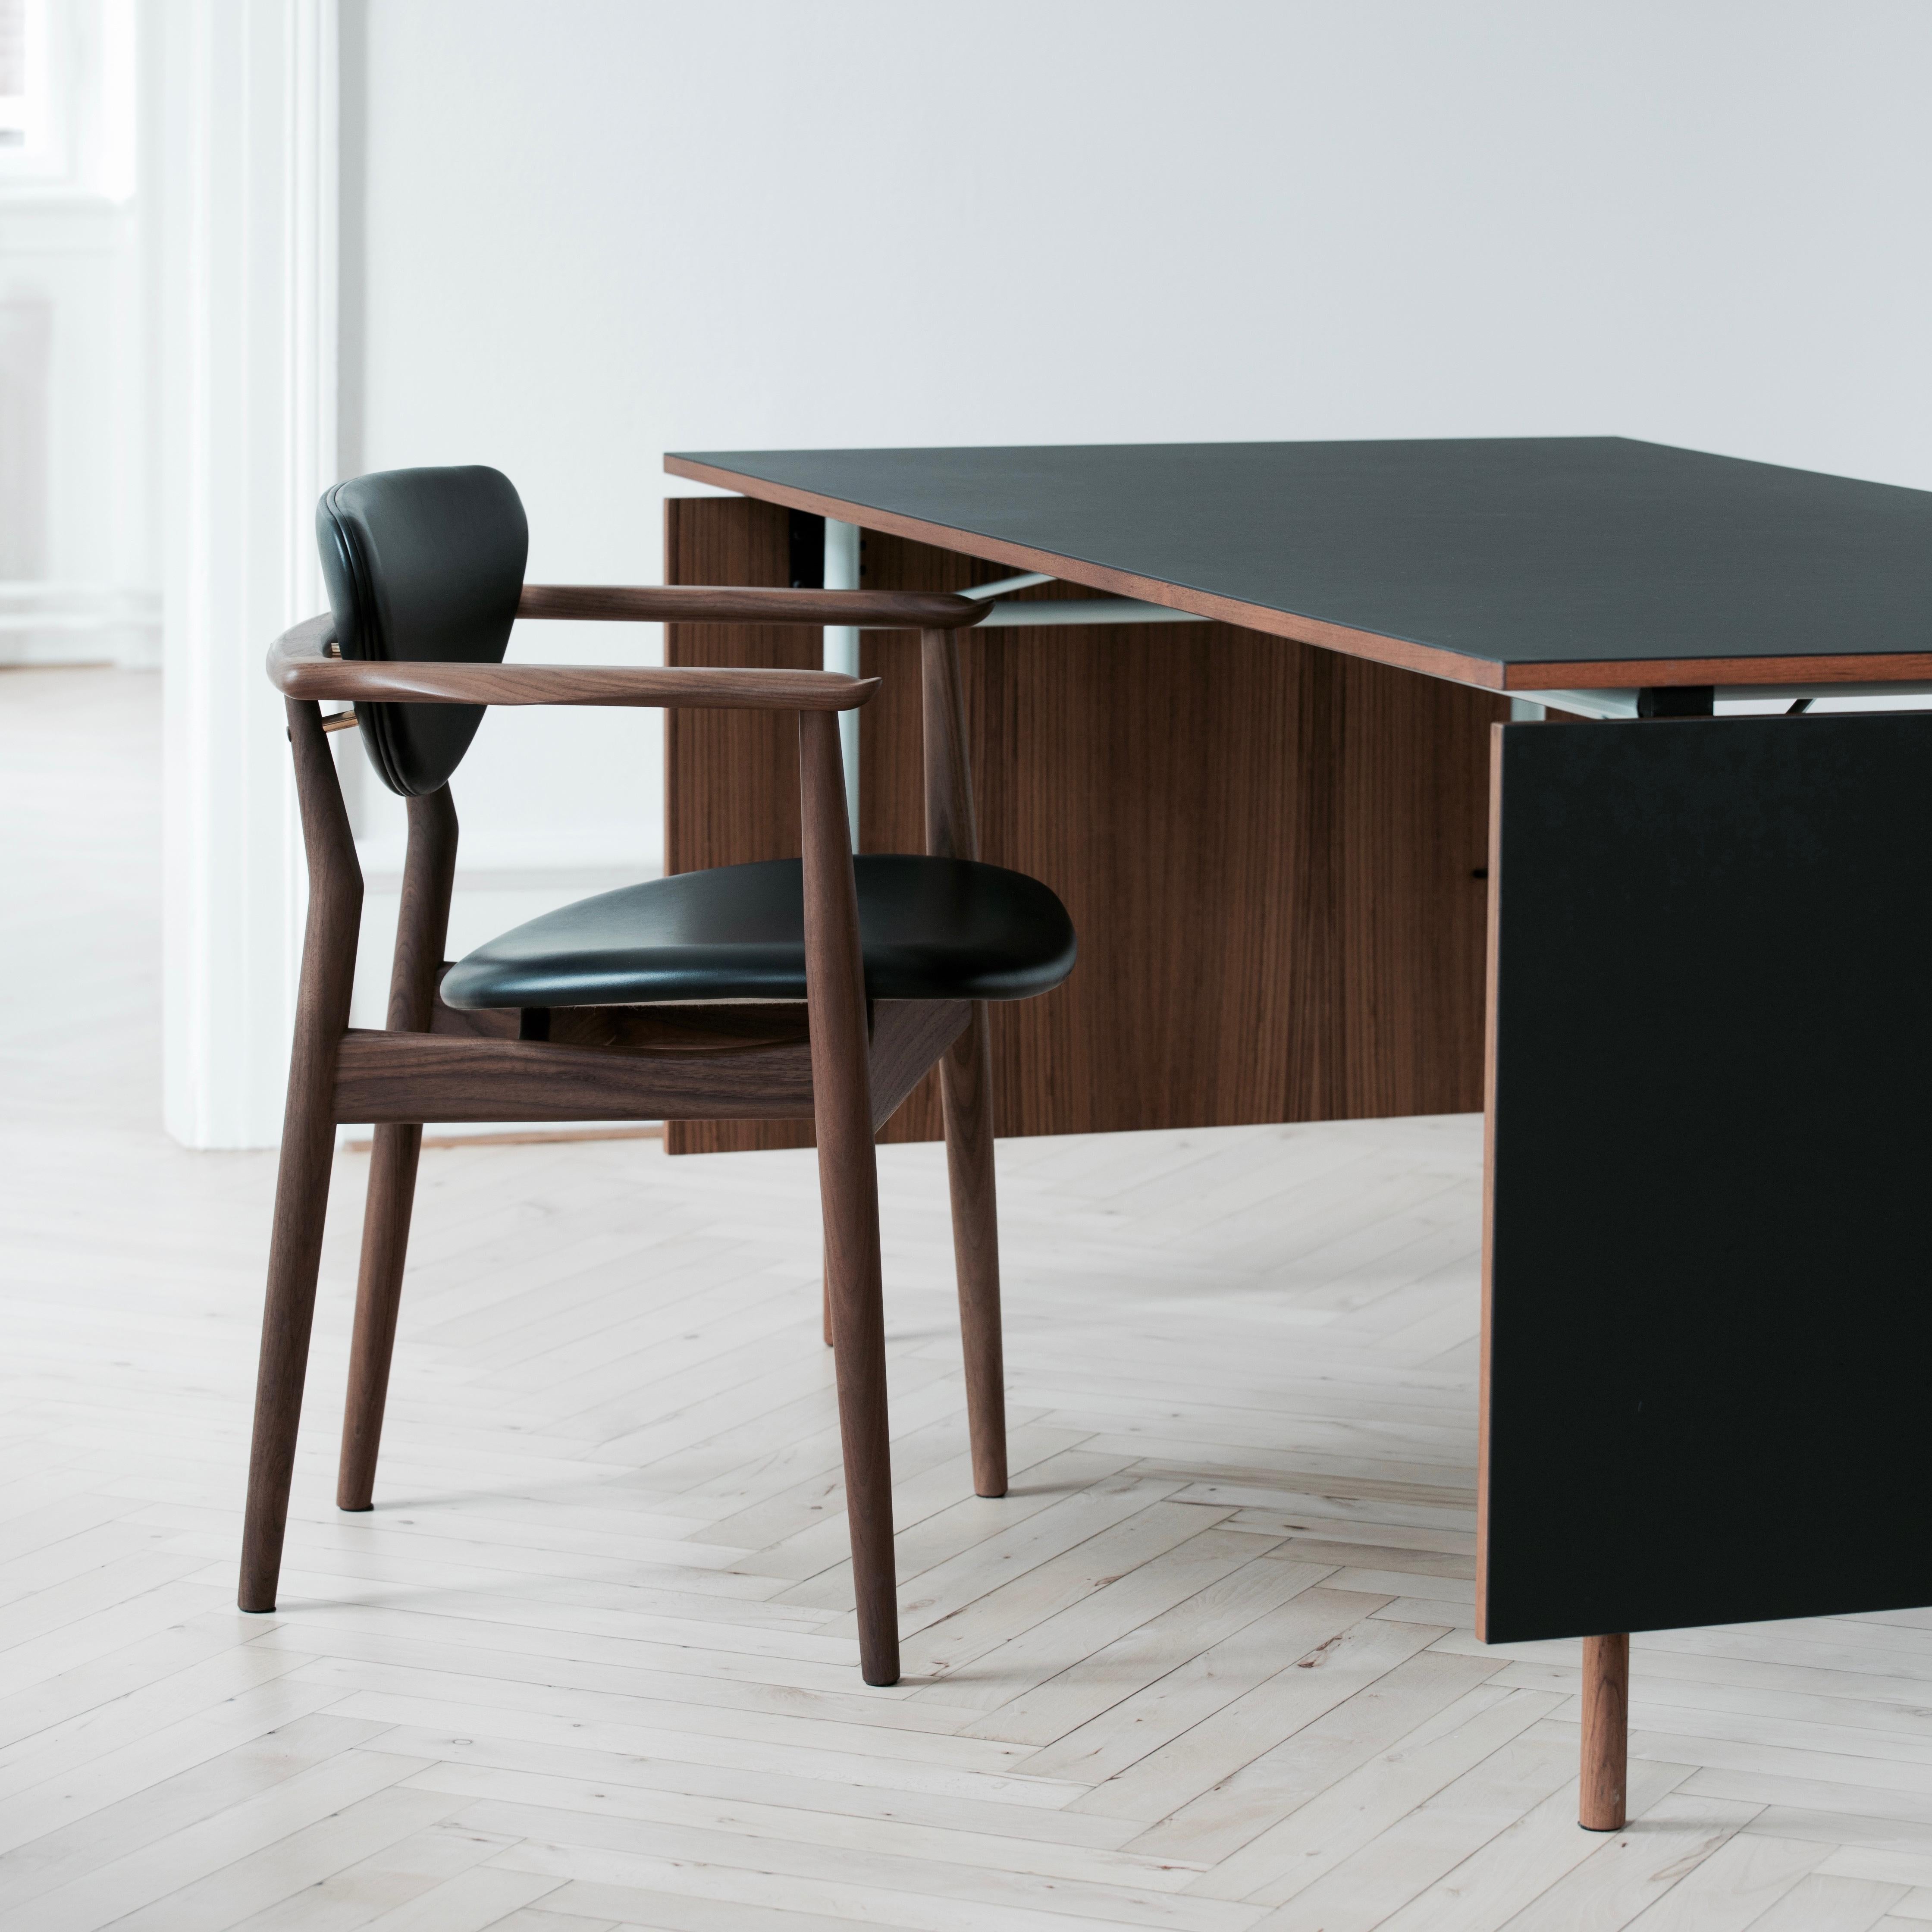 Finn Juhl Nyhavn Dining Table with Two Drop Leaves, Lino and Wood 1